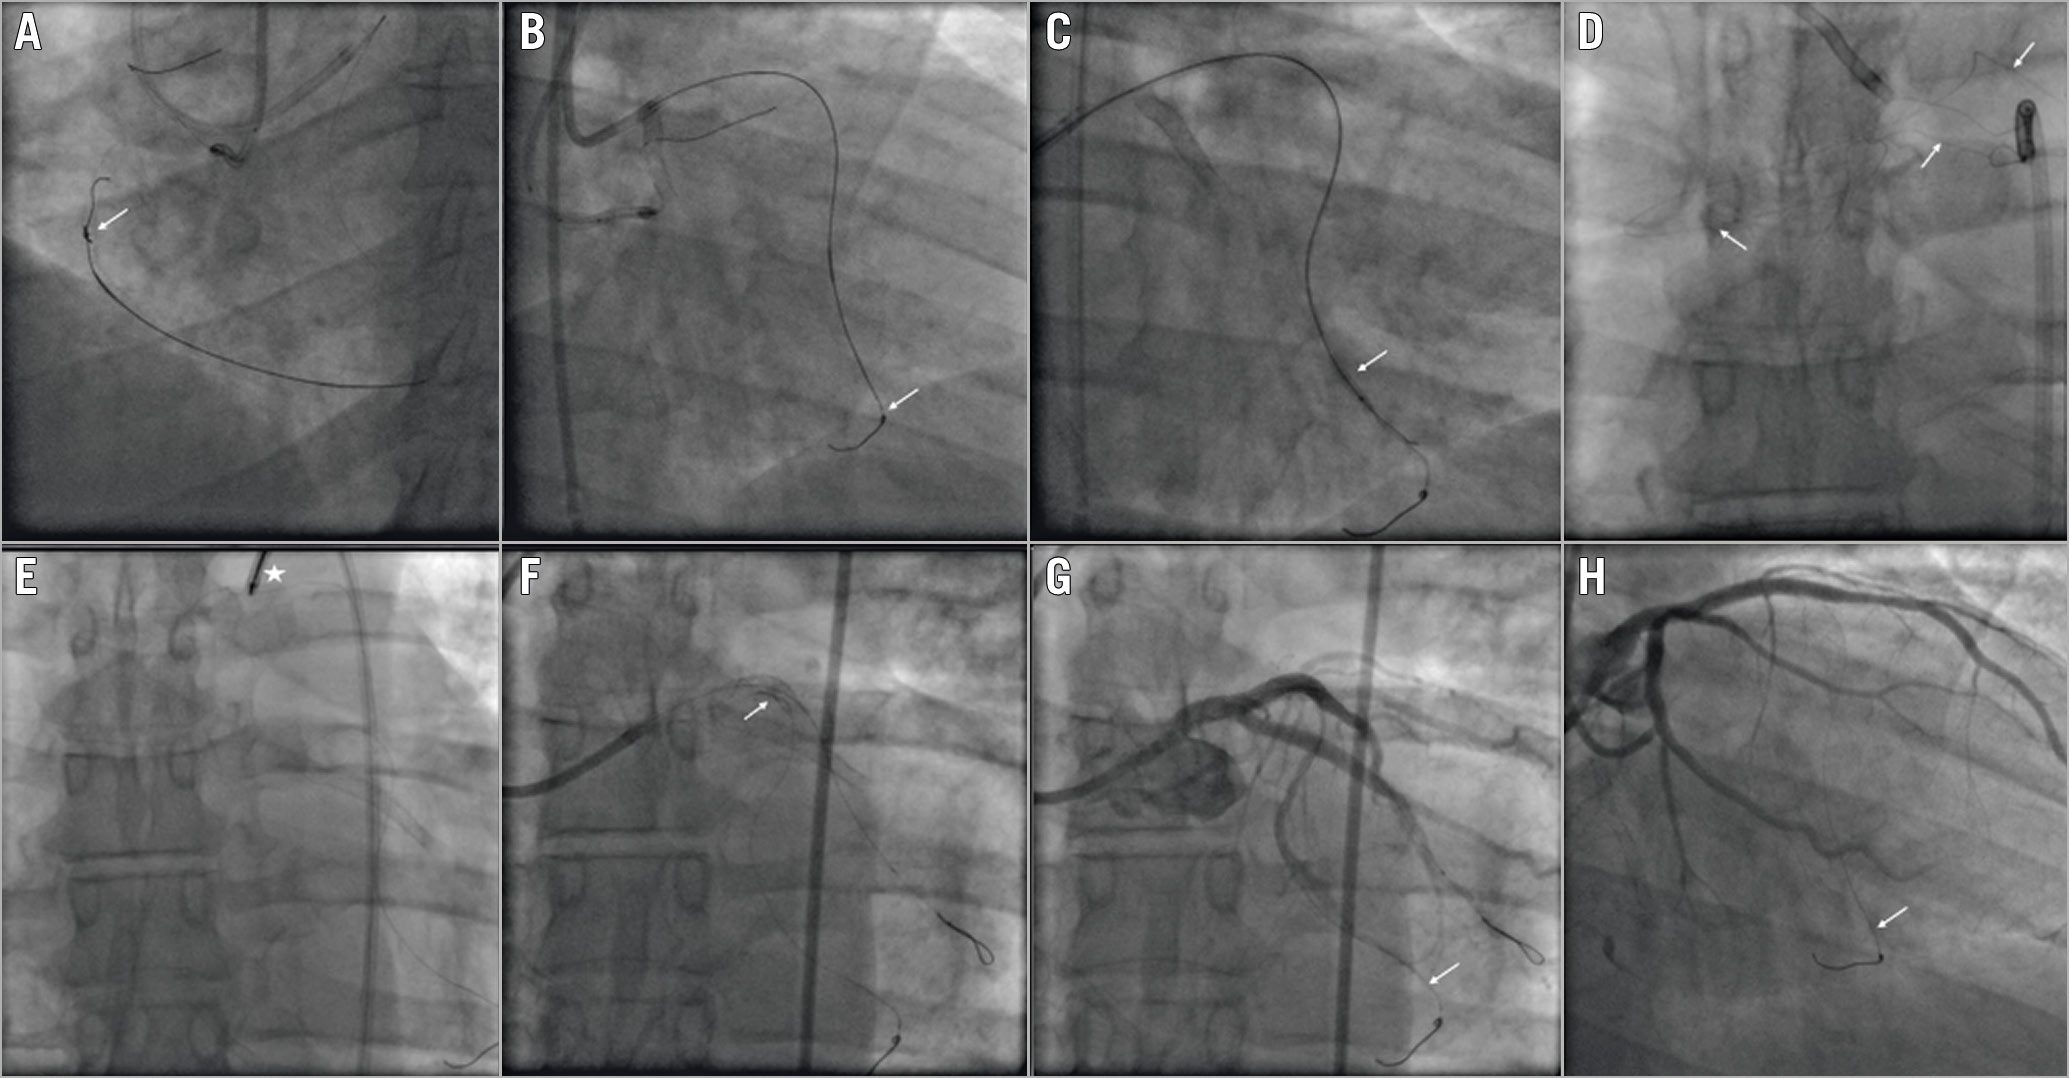 Figure 3. Guidewire entrapment: unfolding of the coil into small filaments. A) A retrograde ULTIMATEbros 3 (Asahi Intecc) guidewire knot (white arrow). B) Guidewire entrapment into the septal branch (white arrow). C) Balloon angioplasty around the entrapped guidewire (white arrow). D) Guidewire unfolding into a small filament (white arrows). E) Snaring of the unravelled guidewire fragment (white asterisk). F) Left main and proximal LAD stenting to trap the unravelled fragment (white arrow). G) Final result (white arrow showing the entrapped guidewire). H) Six-month coronary angiography follow-up (white arrow showing the entrapped guidewire).